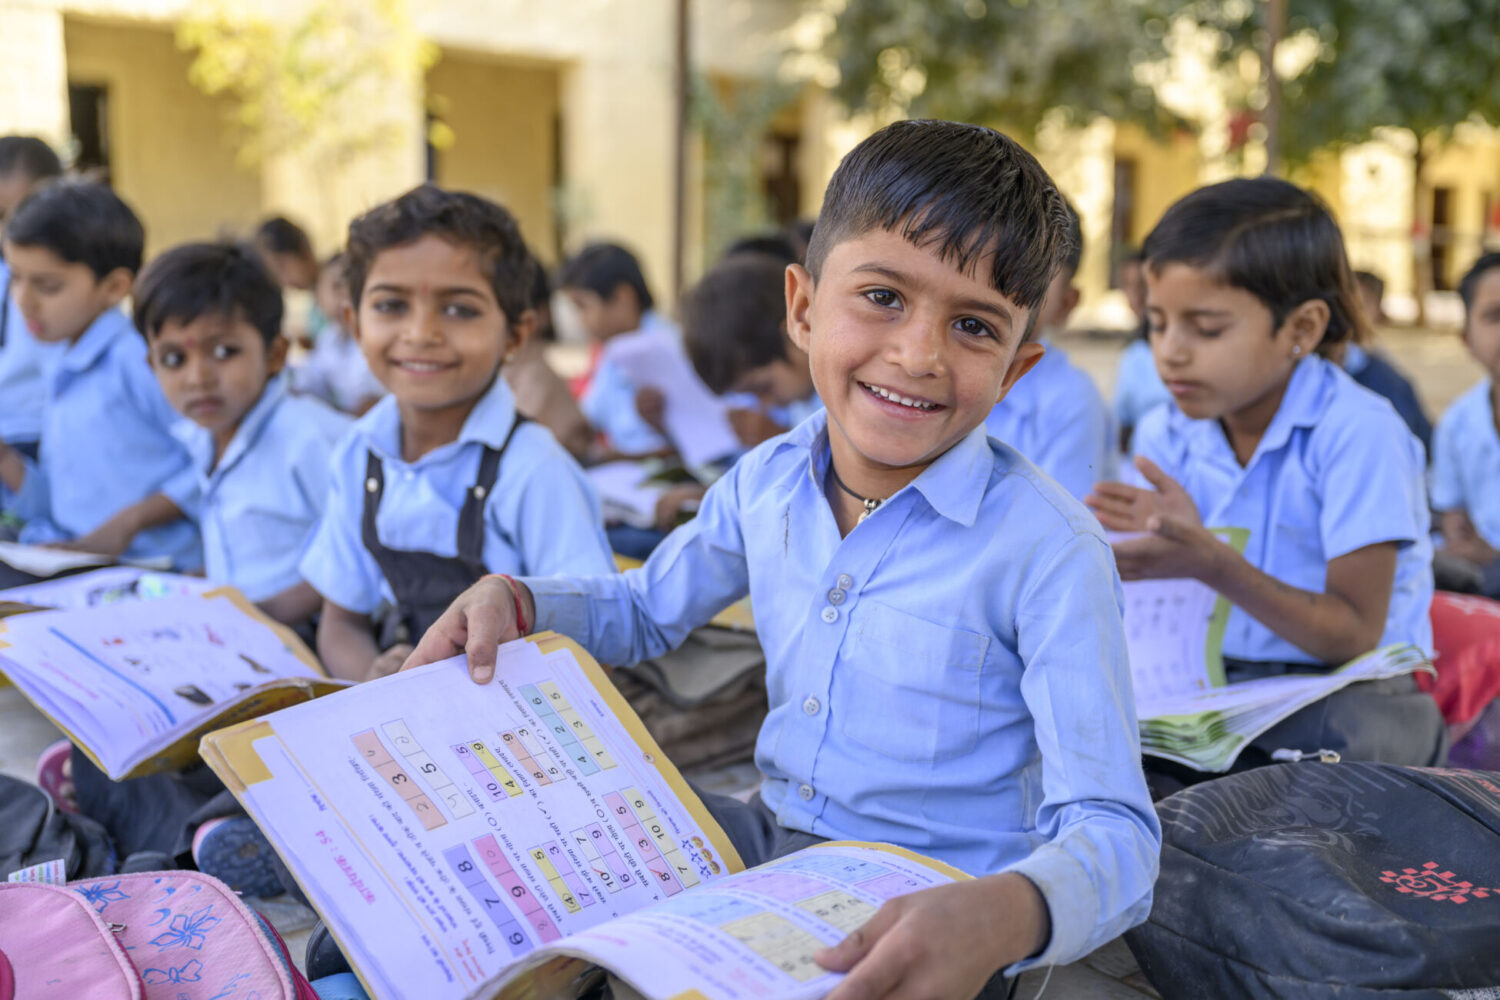 Image of school children smiling and reading books